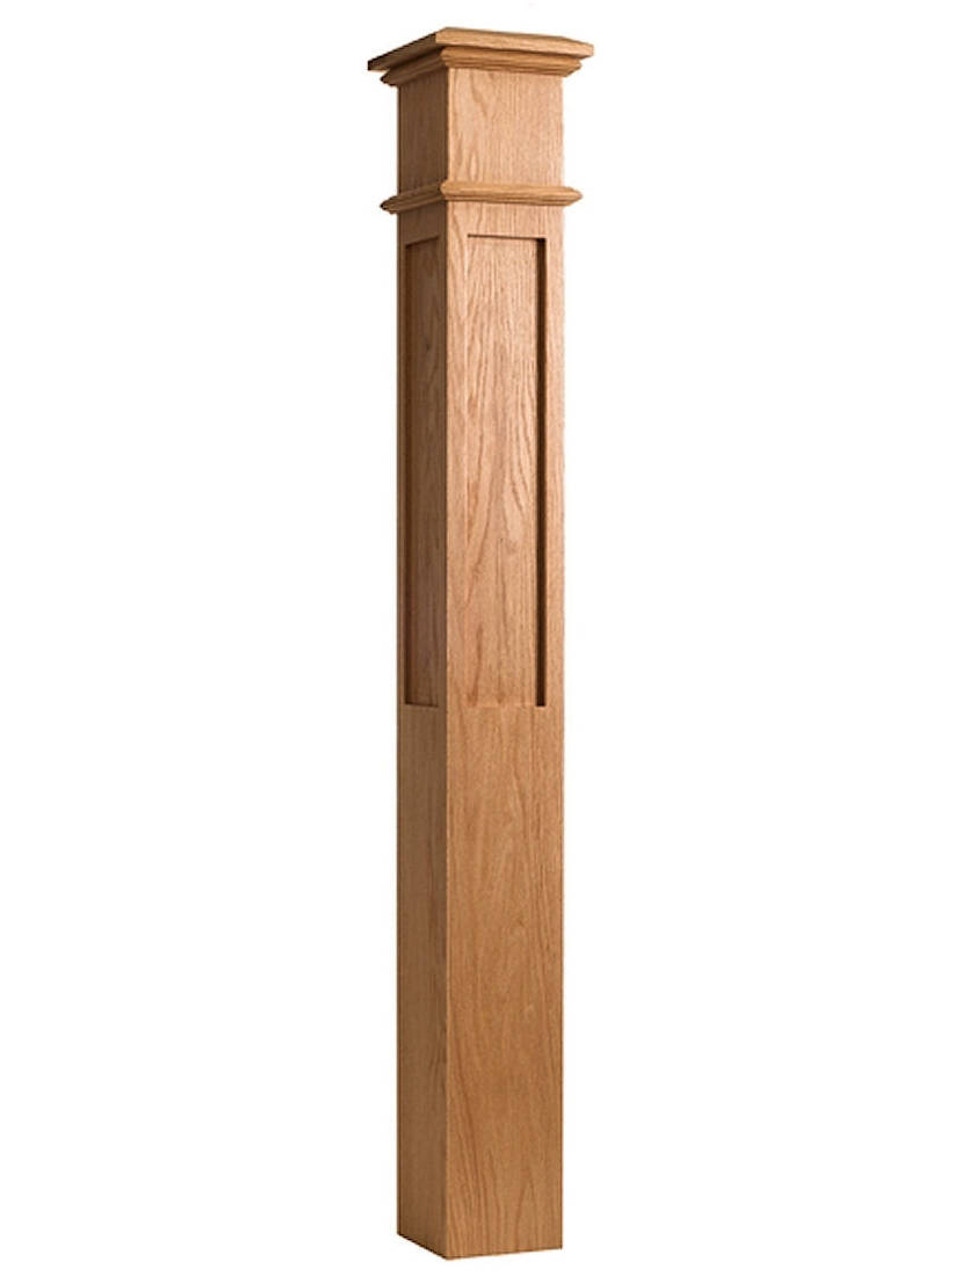 4098 Paneled Box Newel Post, Red Oak or Mapl